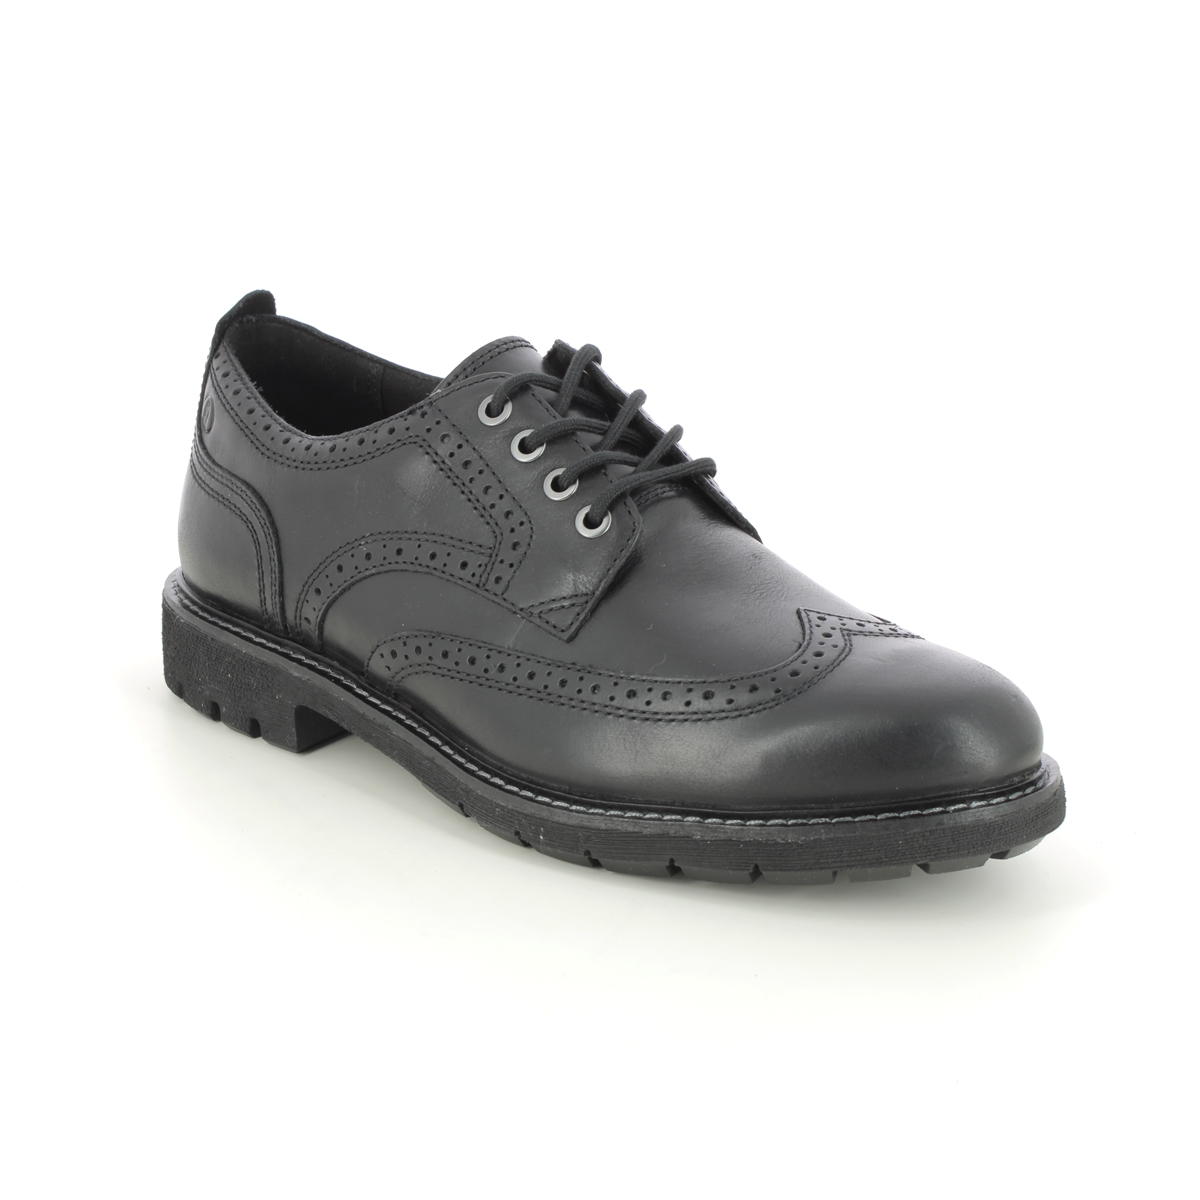 Clarks Batcombe Far Wing Black Leather Mens Brogues 734387G In Size 8.5 In Plain Black Leather G Width Fitting